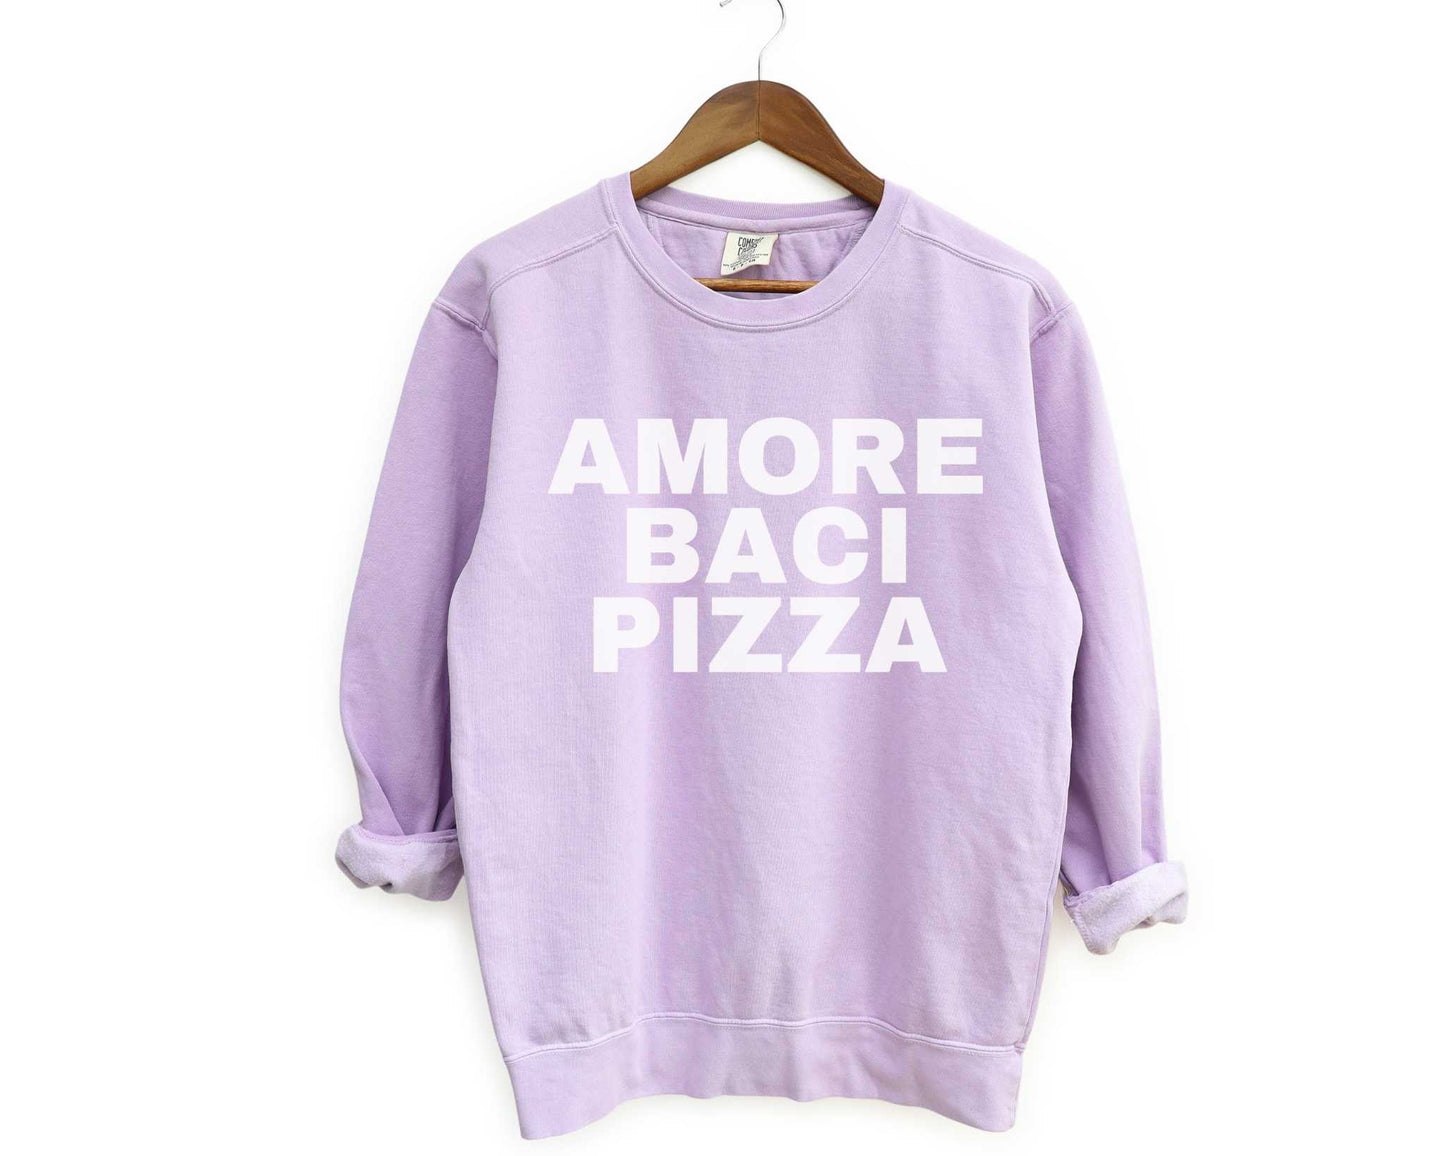 Amore Baci Pizza (Love Kisses Pizza) Sweatshirt in Orchid